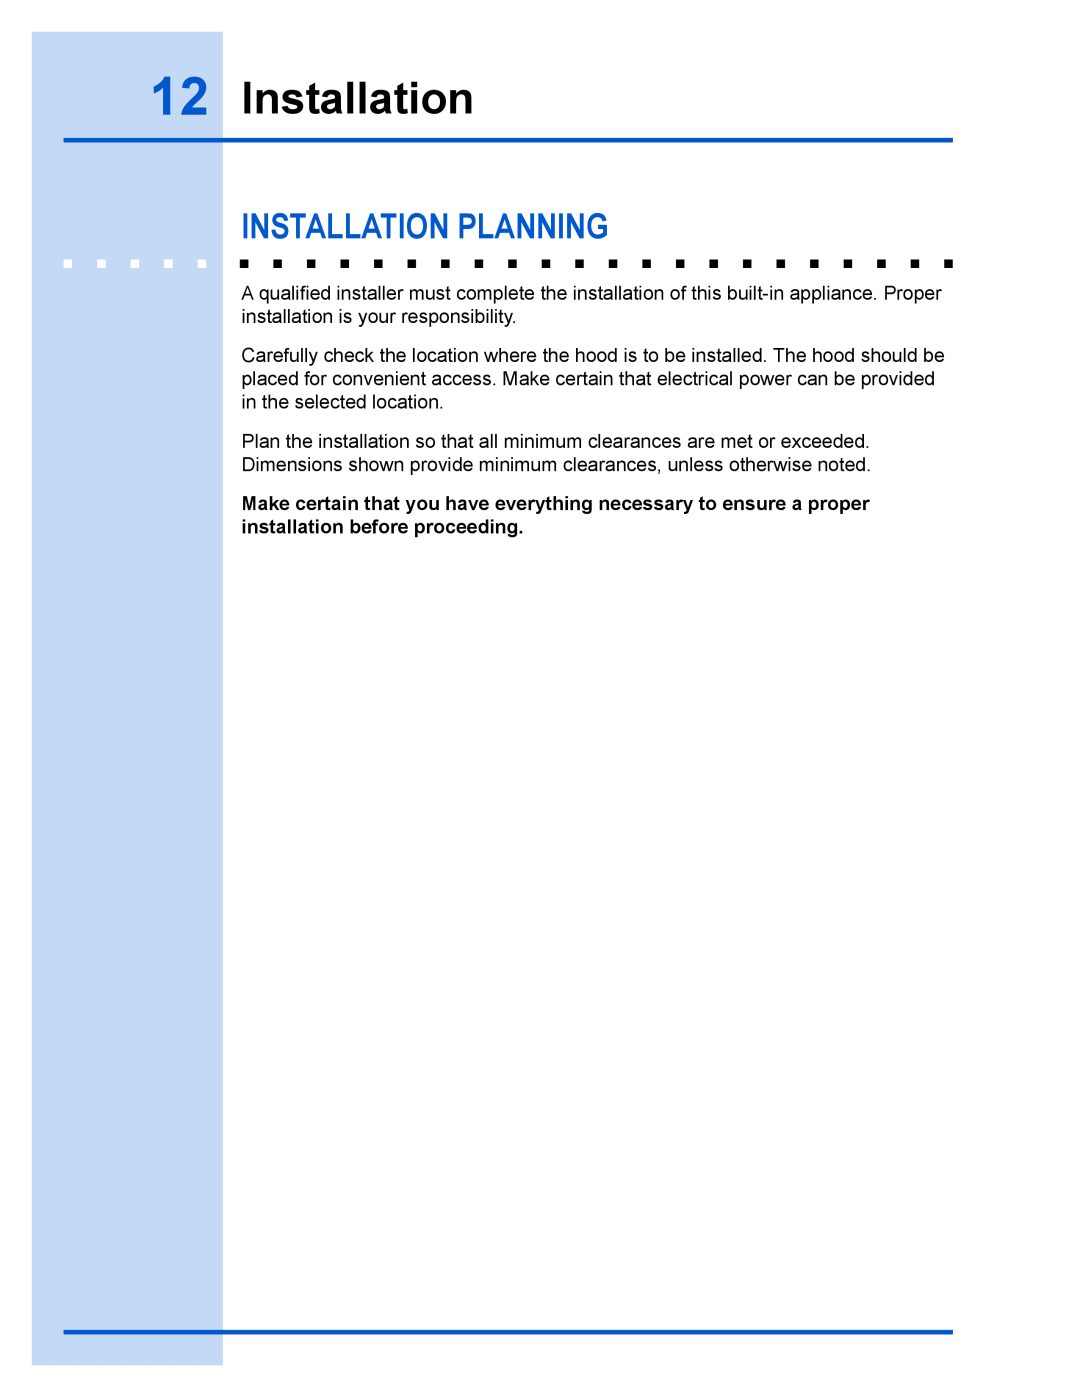 Electrolux E40PV100FS installation instructions Installation Planning 